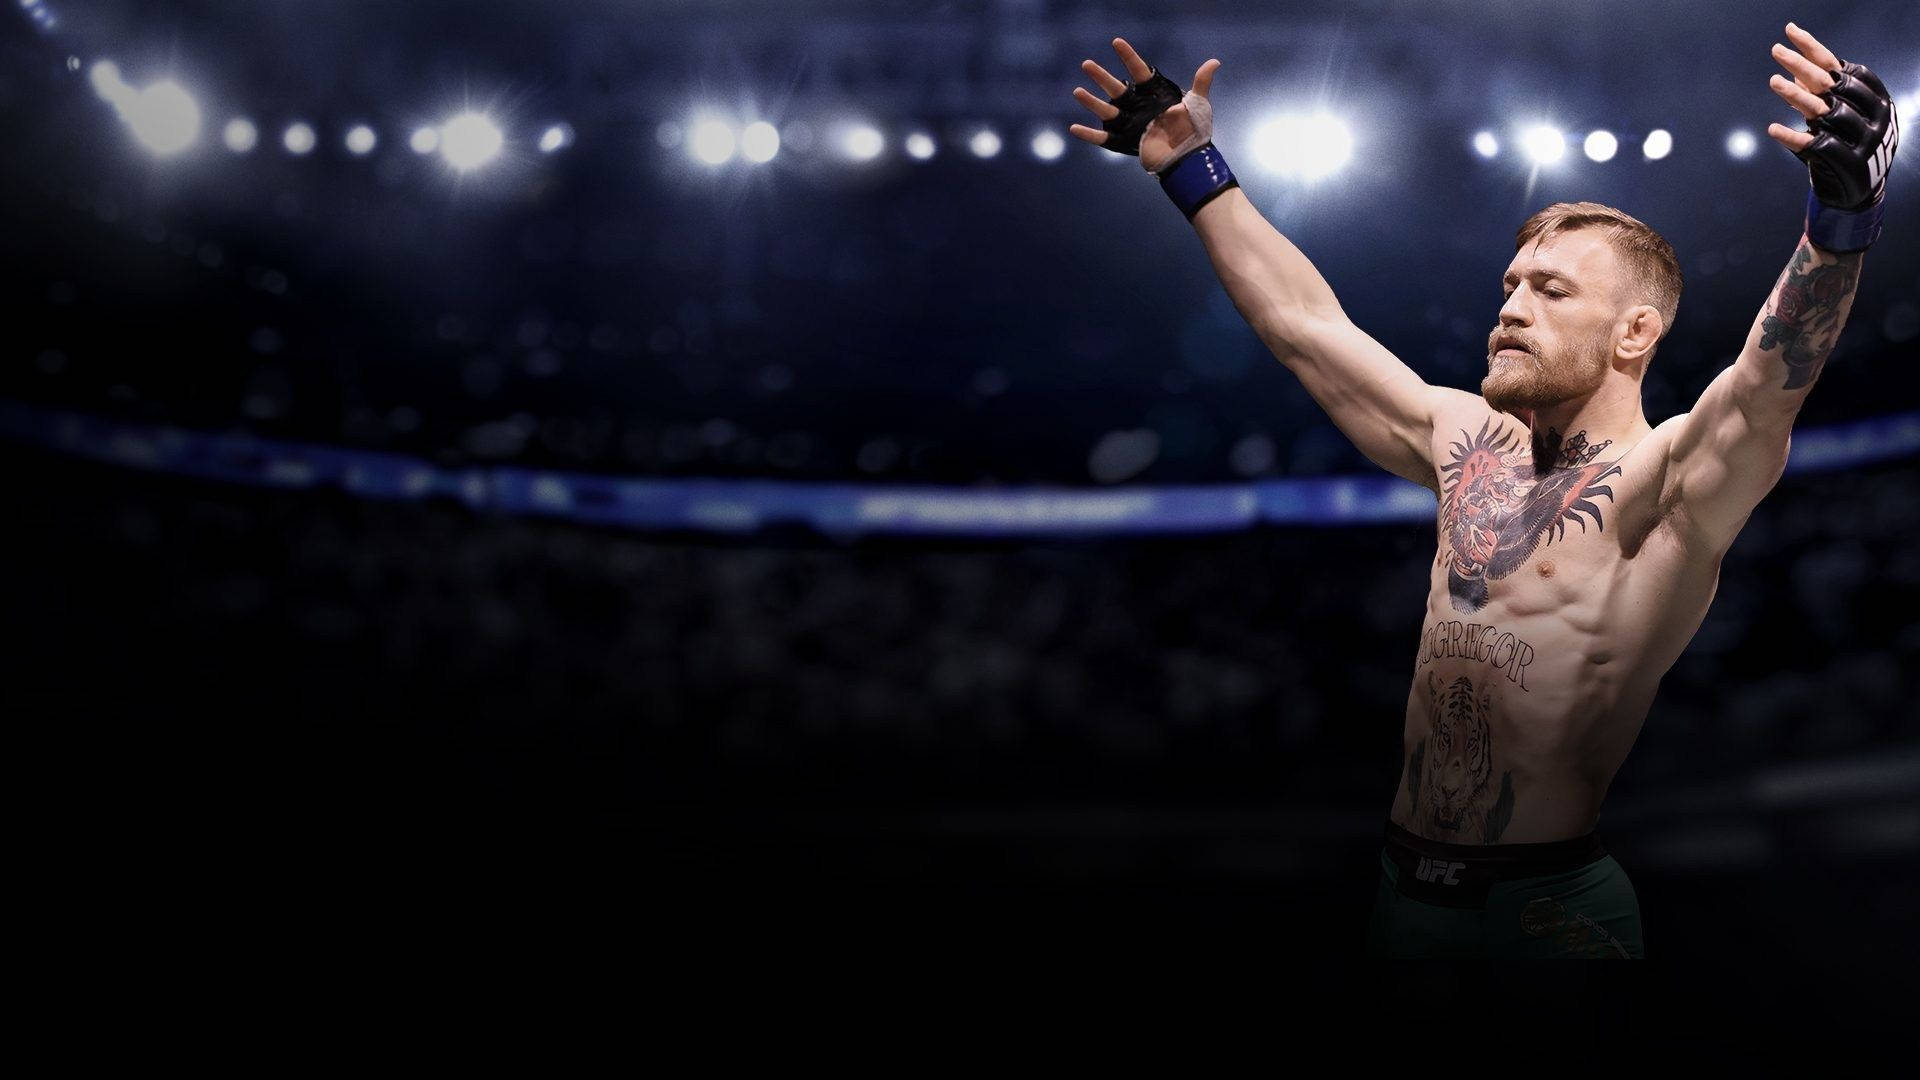 Ufc 1920X1080 Wallpaper and Background Image